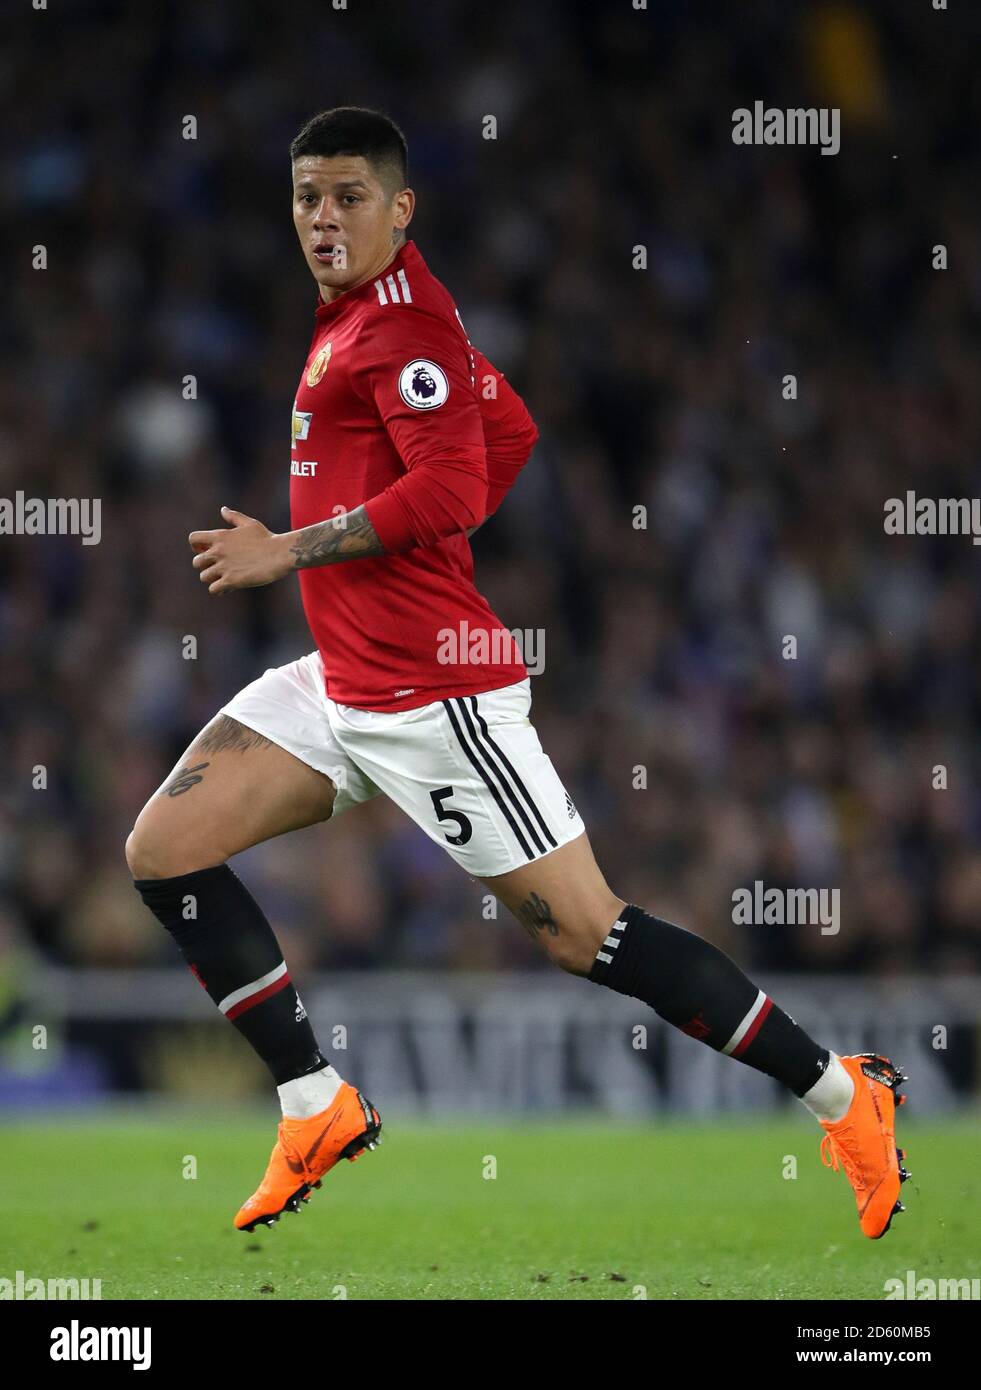 Manchester United's Marcos Rojo Stock Photo